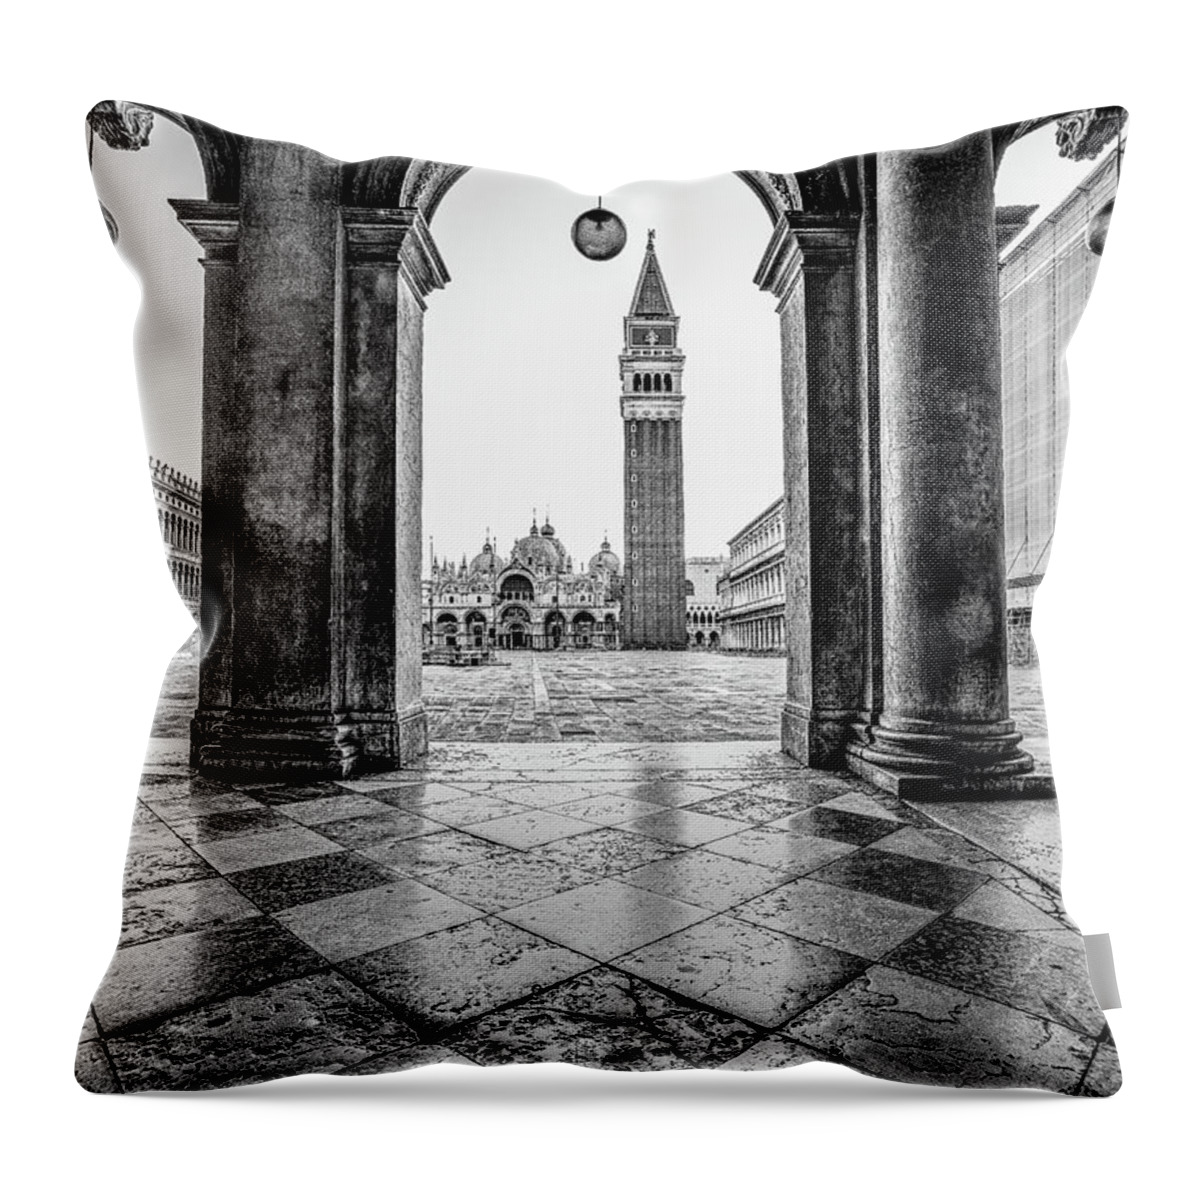 Italy Throw Pillow featuring the photograph BW Study - St. Marks Square by David Downs